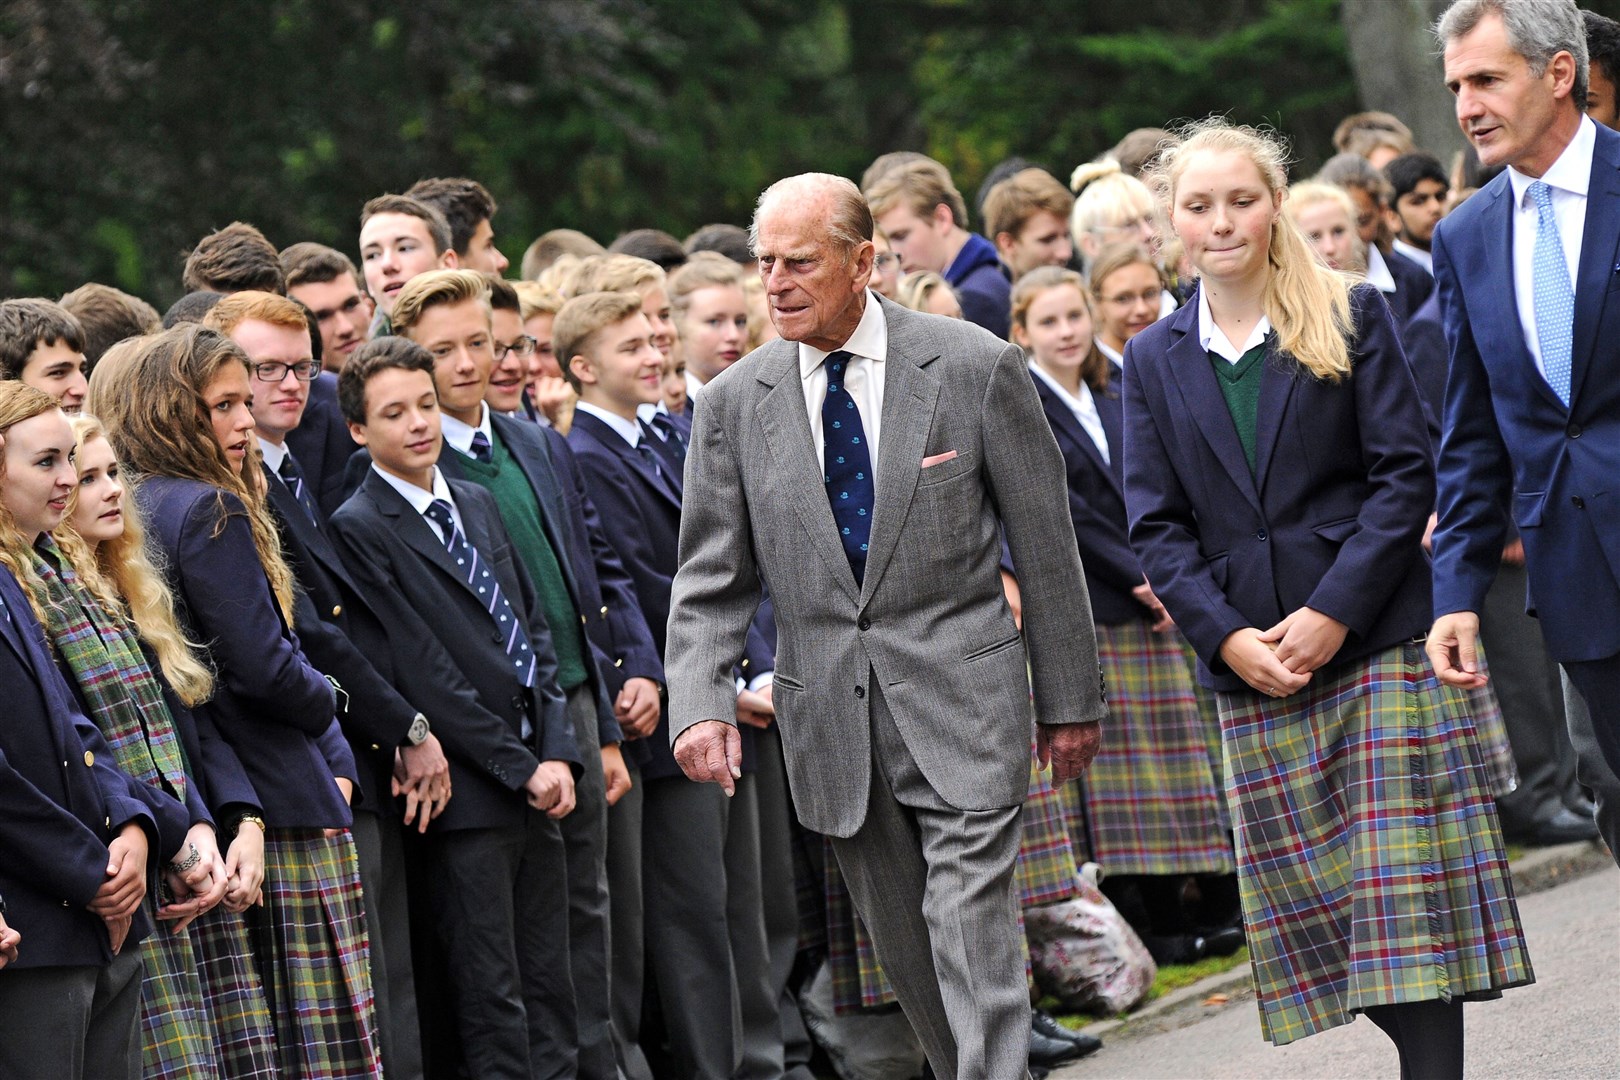 Prince Philip, Duke of Edinburgh, visits his former school as it marked it's 80th anniversary in 2014.